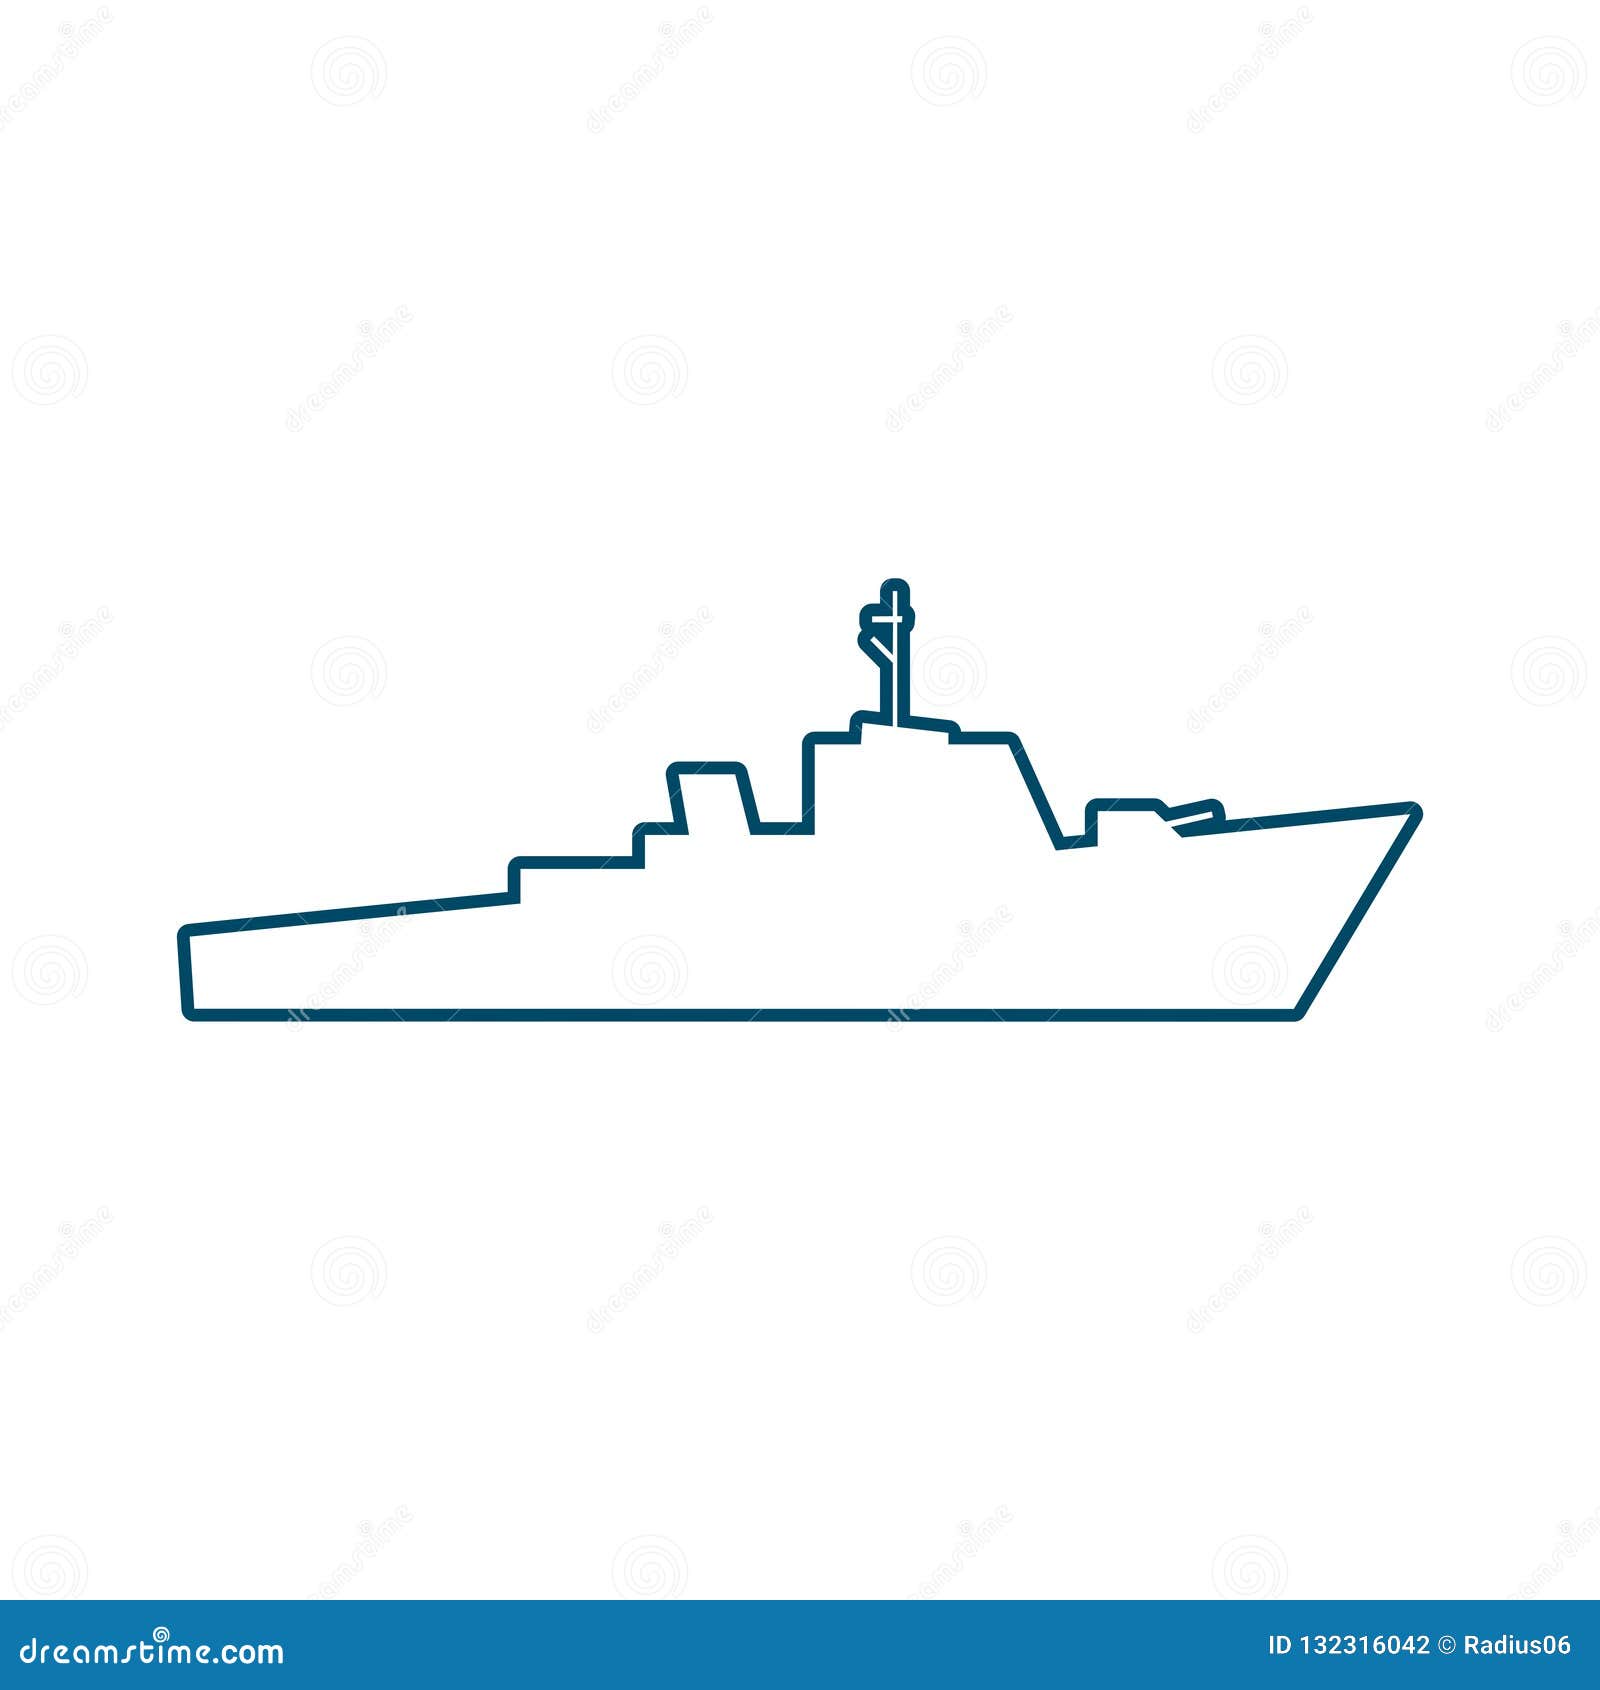 silhouette of warship